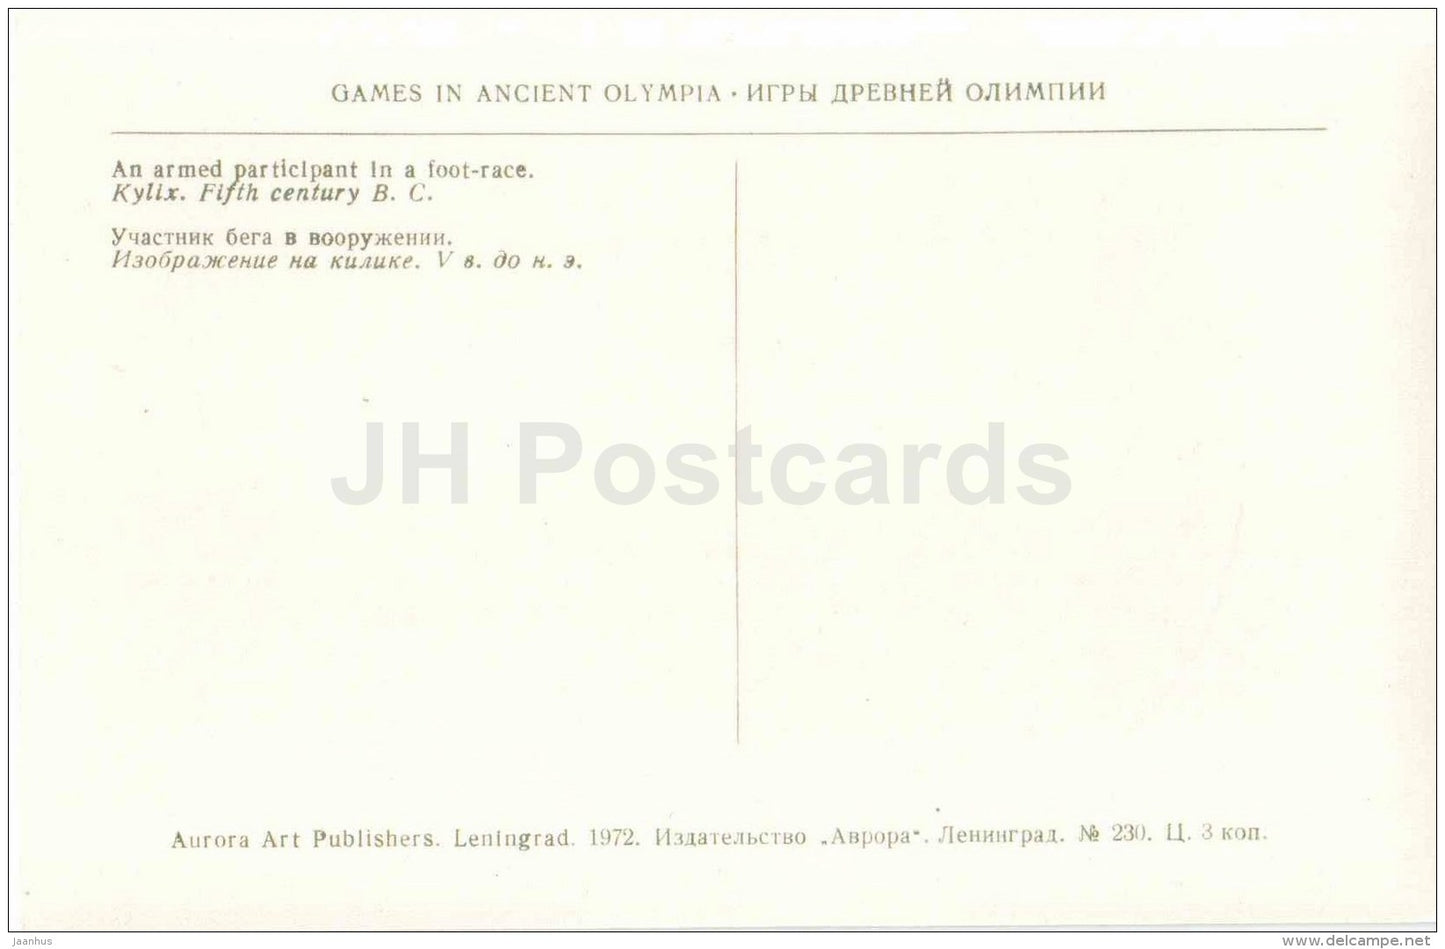 An Armed Participant in a Foot-Race - Games in Ancient Olympia - Greece - 1972 - Russia USSR - unused - JH Postcards